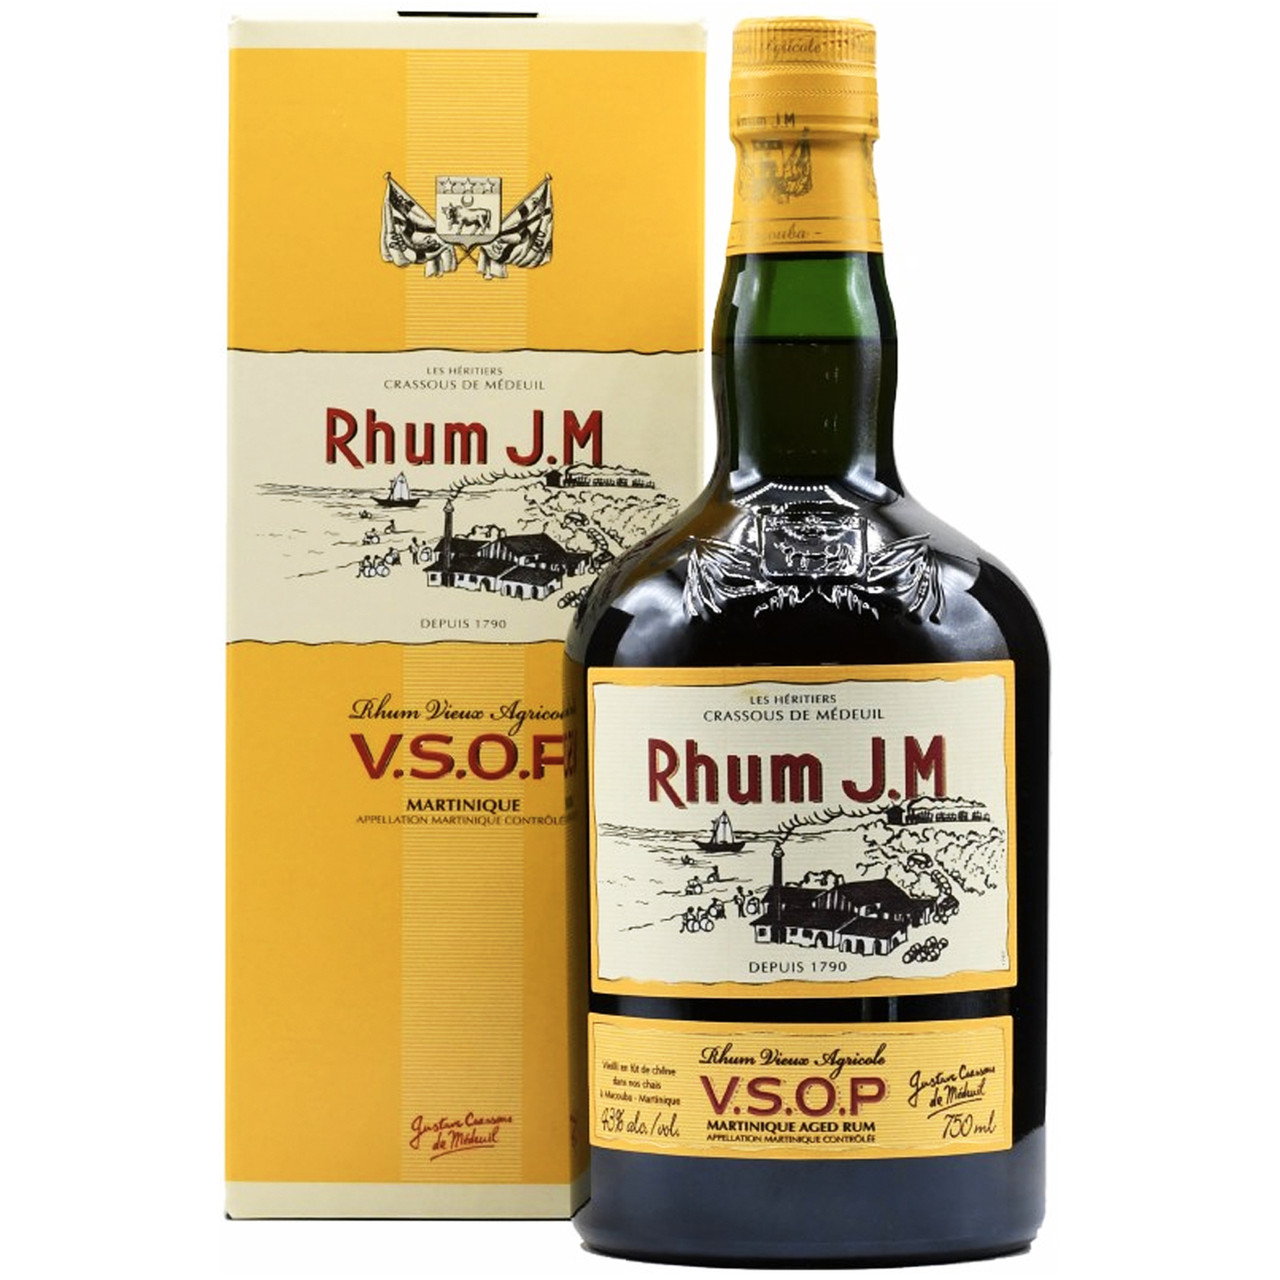 Rhum Jm Rhum Agricole VSOP Aged Rum Nv - Fine wine and spirits with low  prices, Syosset, NY